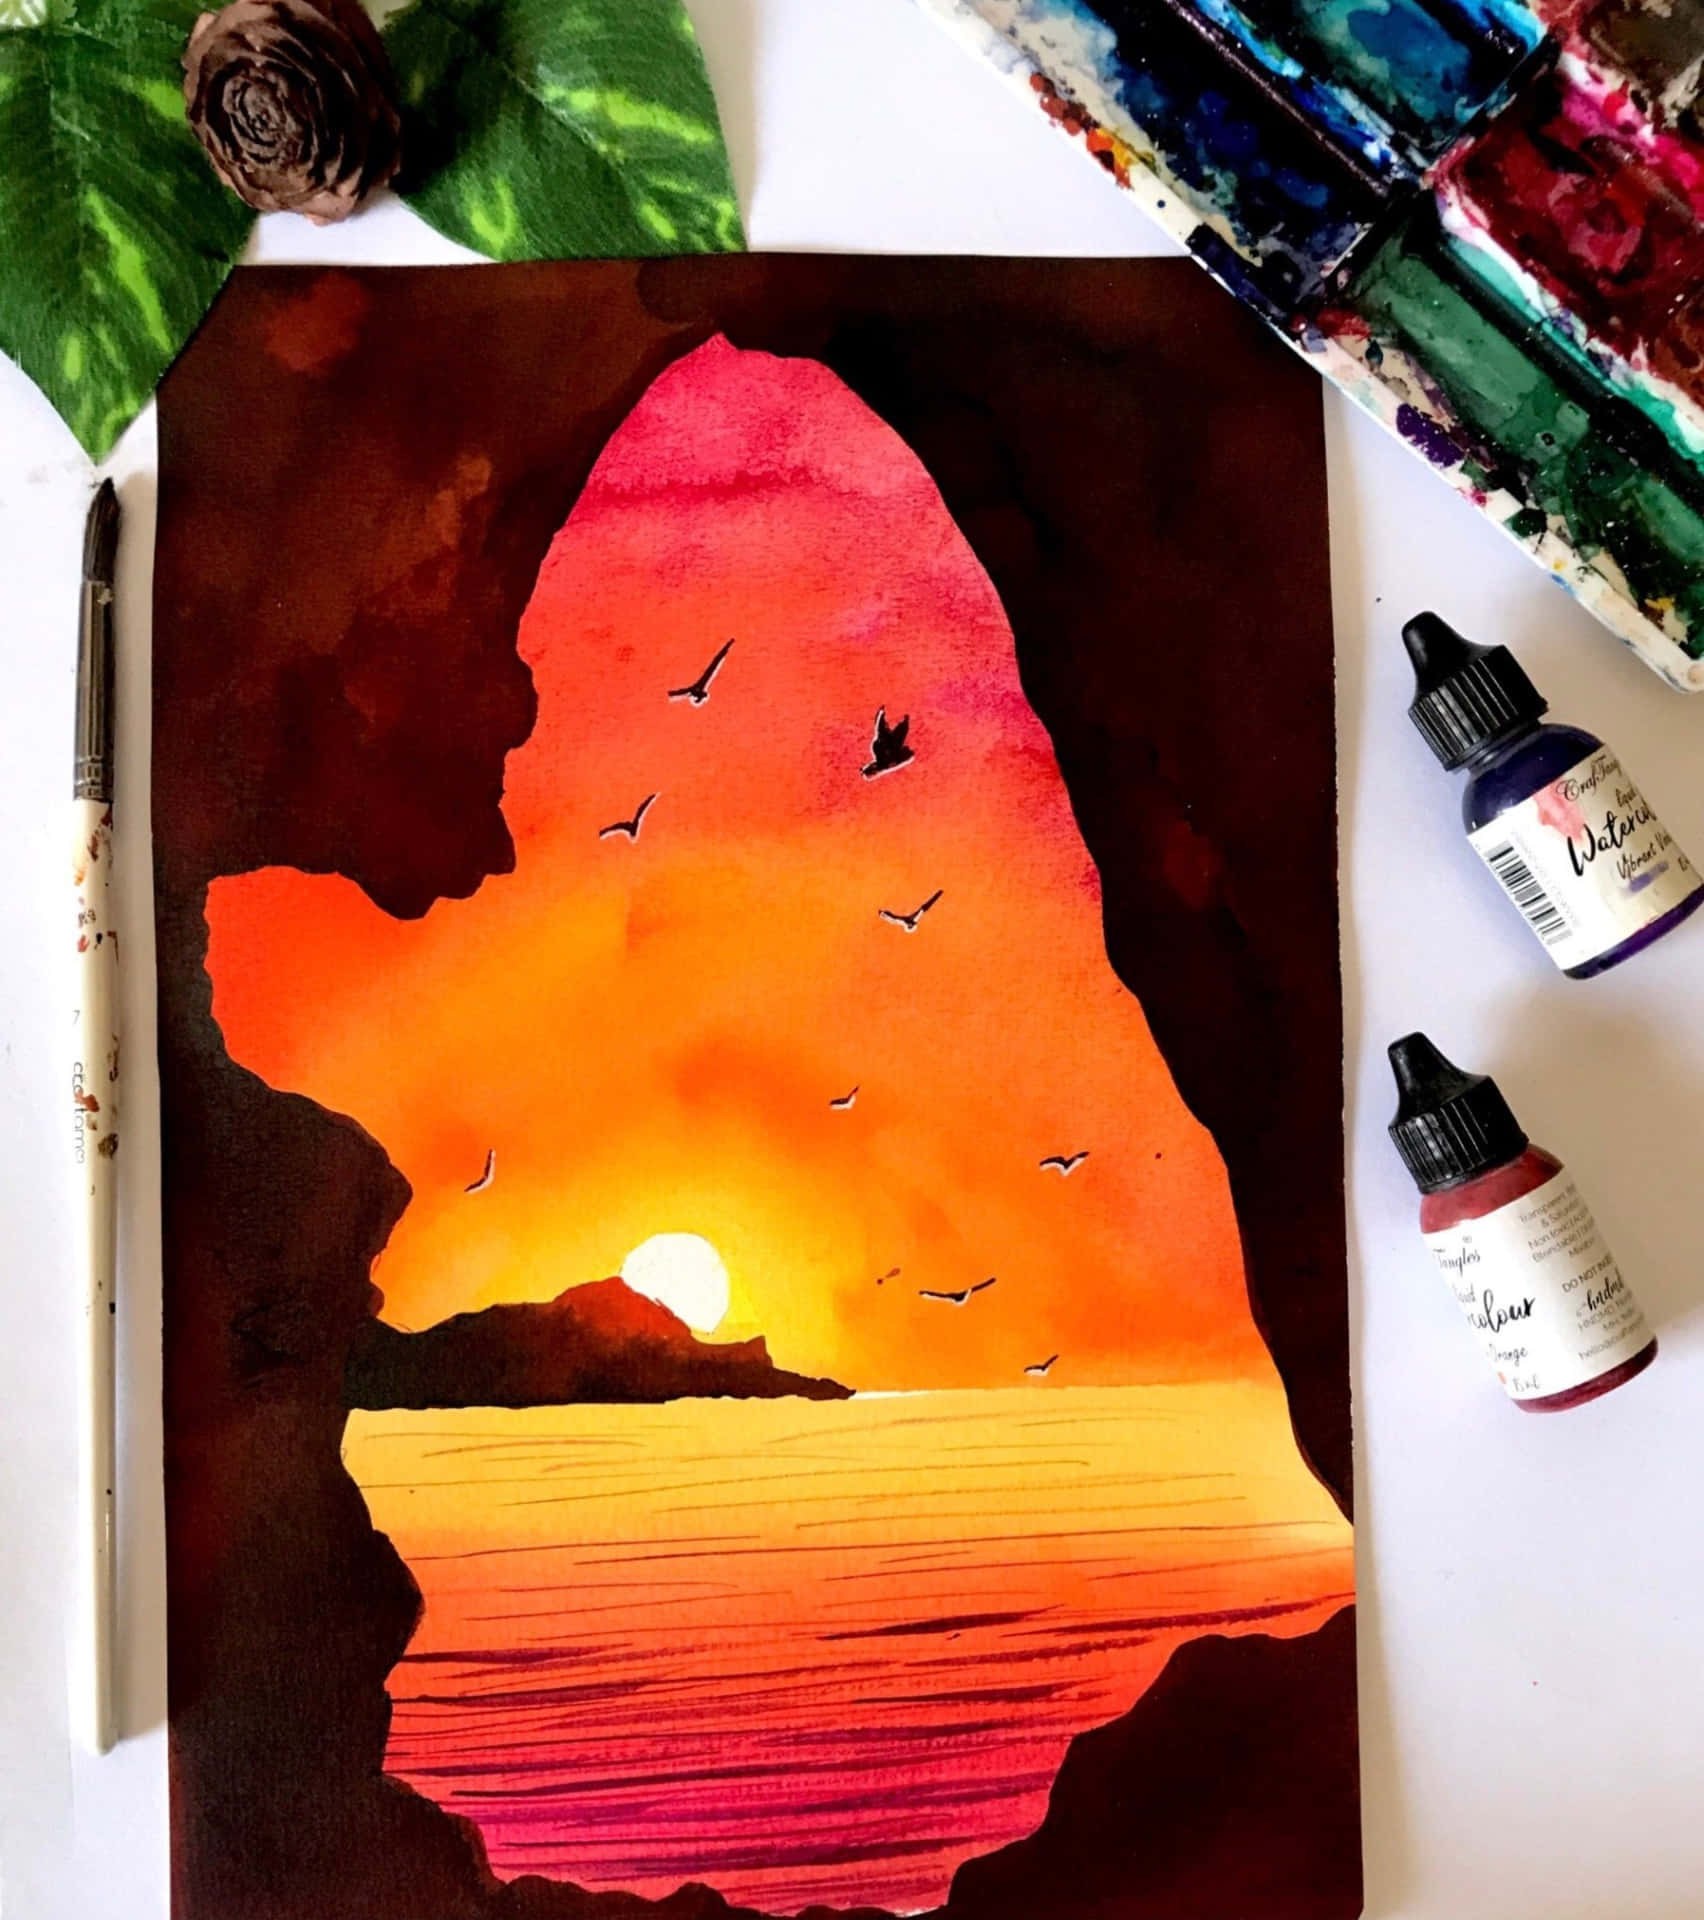 A Watercolor Painting Of A Sunset With Birds And A Bottle Of Paint